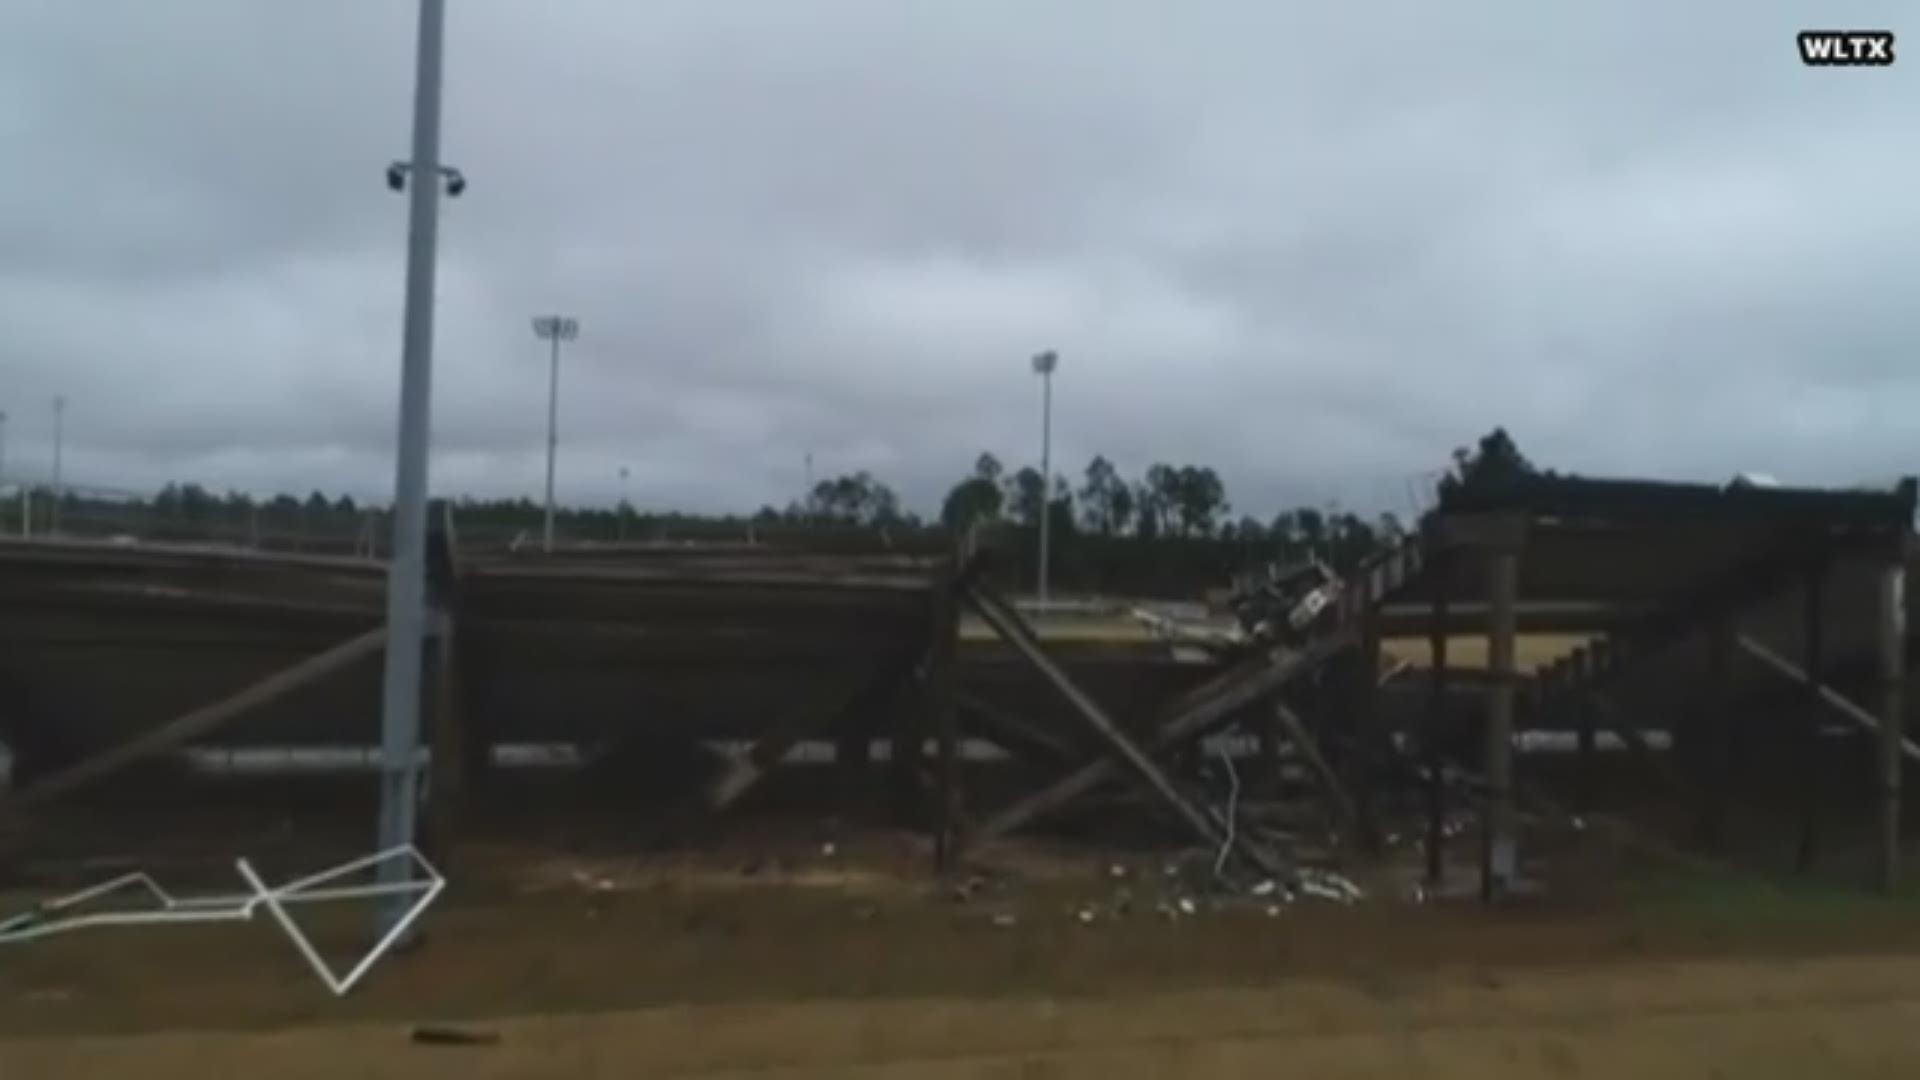 A tornado touched down Saturday night in Kershaw County and damaged a high school, football stadium, and buses, but no one was injured.